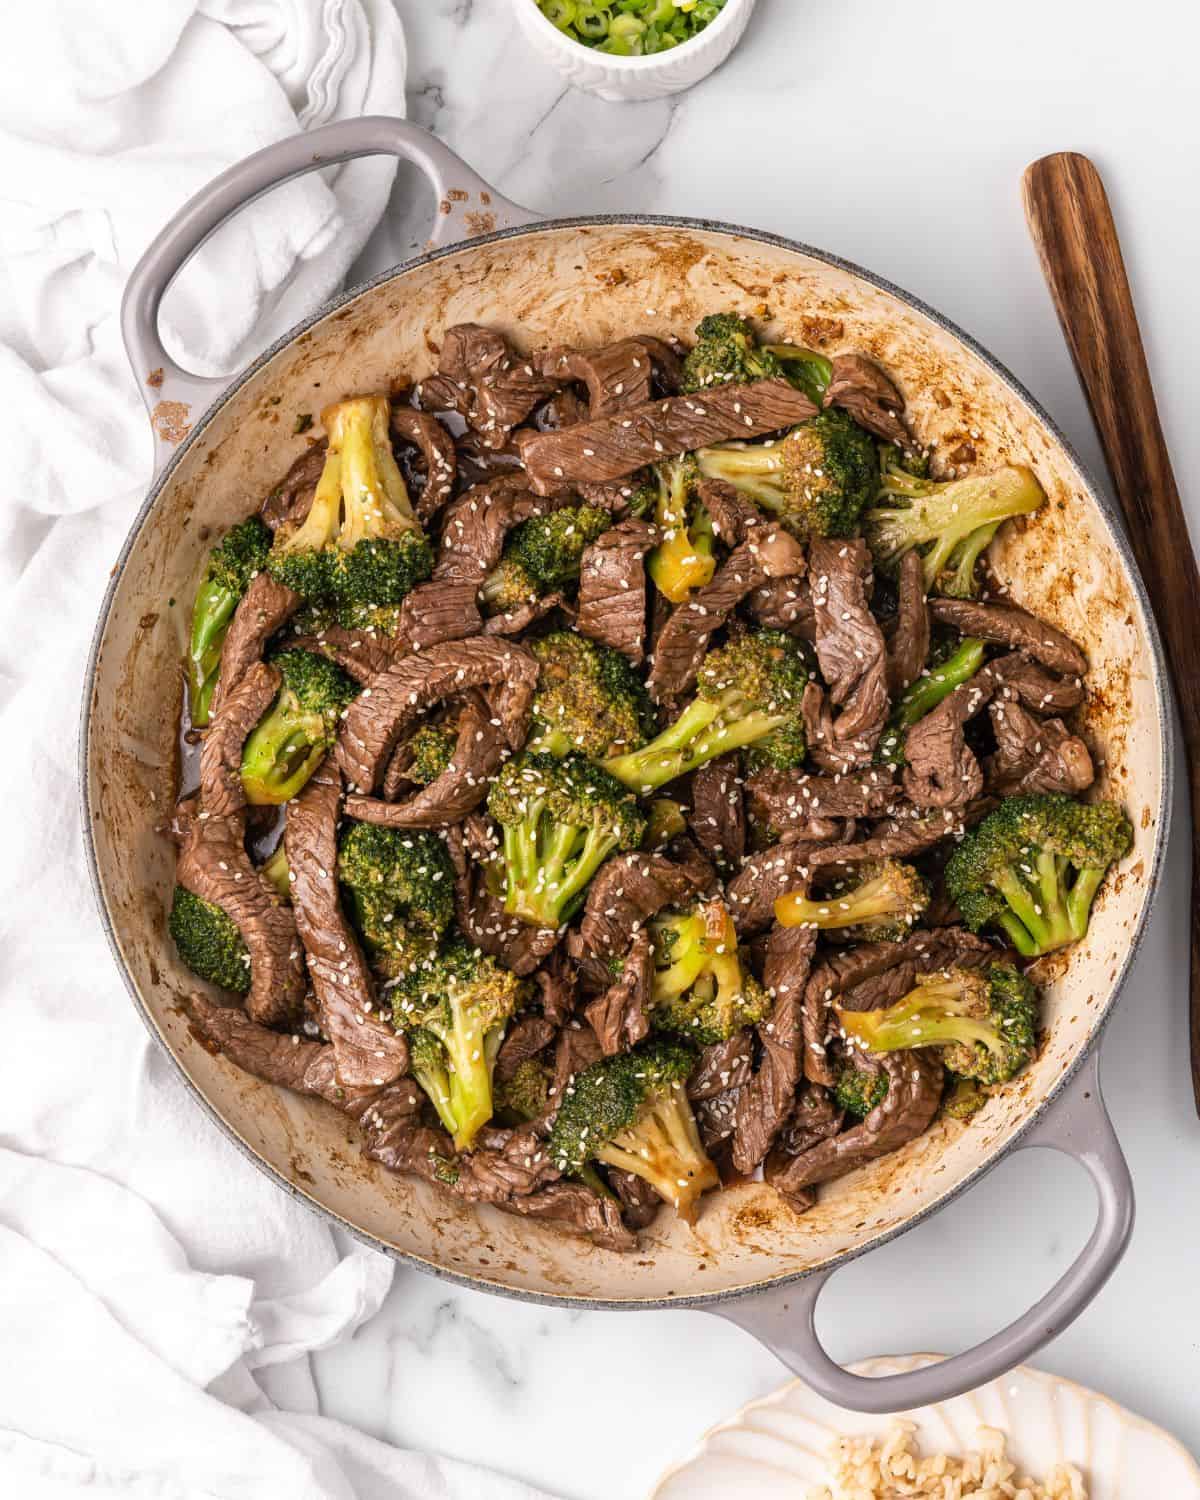 easy beef and broccoli mixed together.